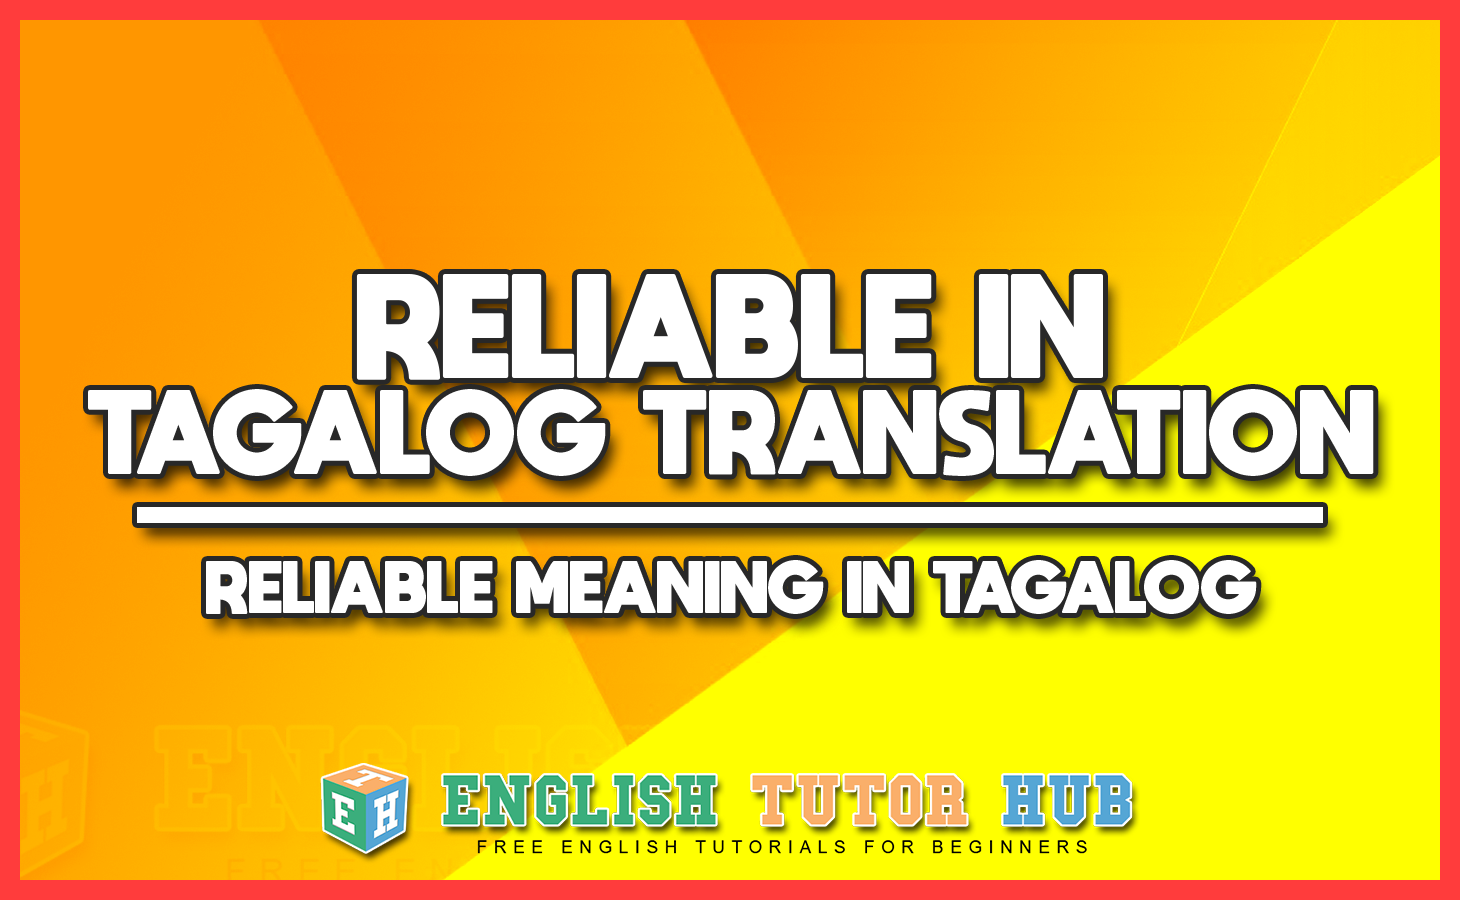 RELIABLE IN TAGALOG TRANSLATION